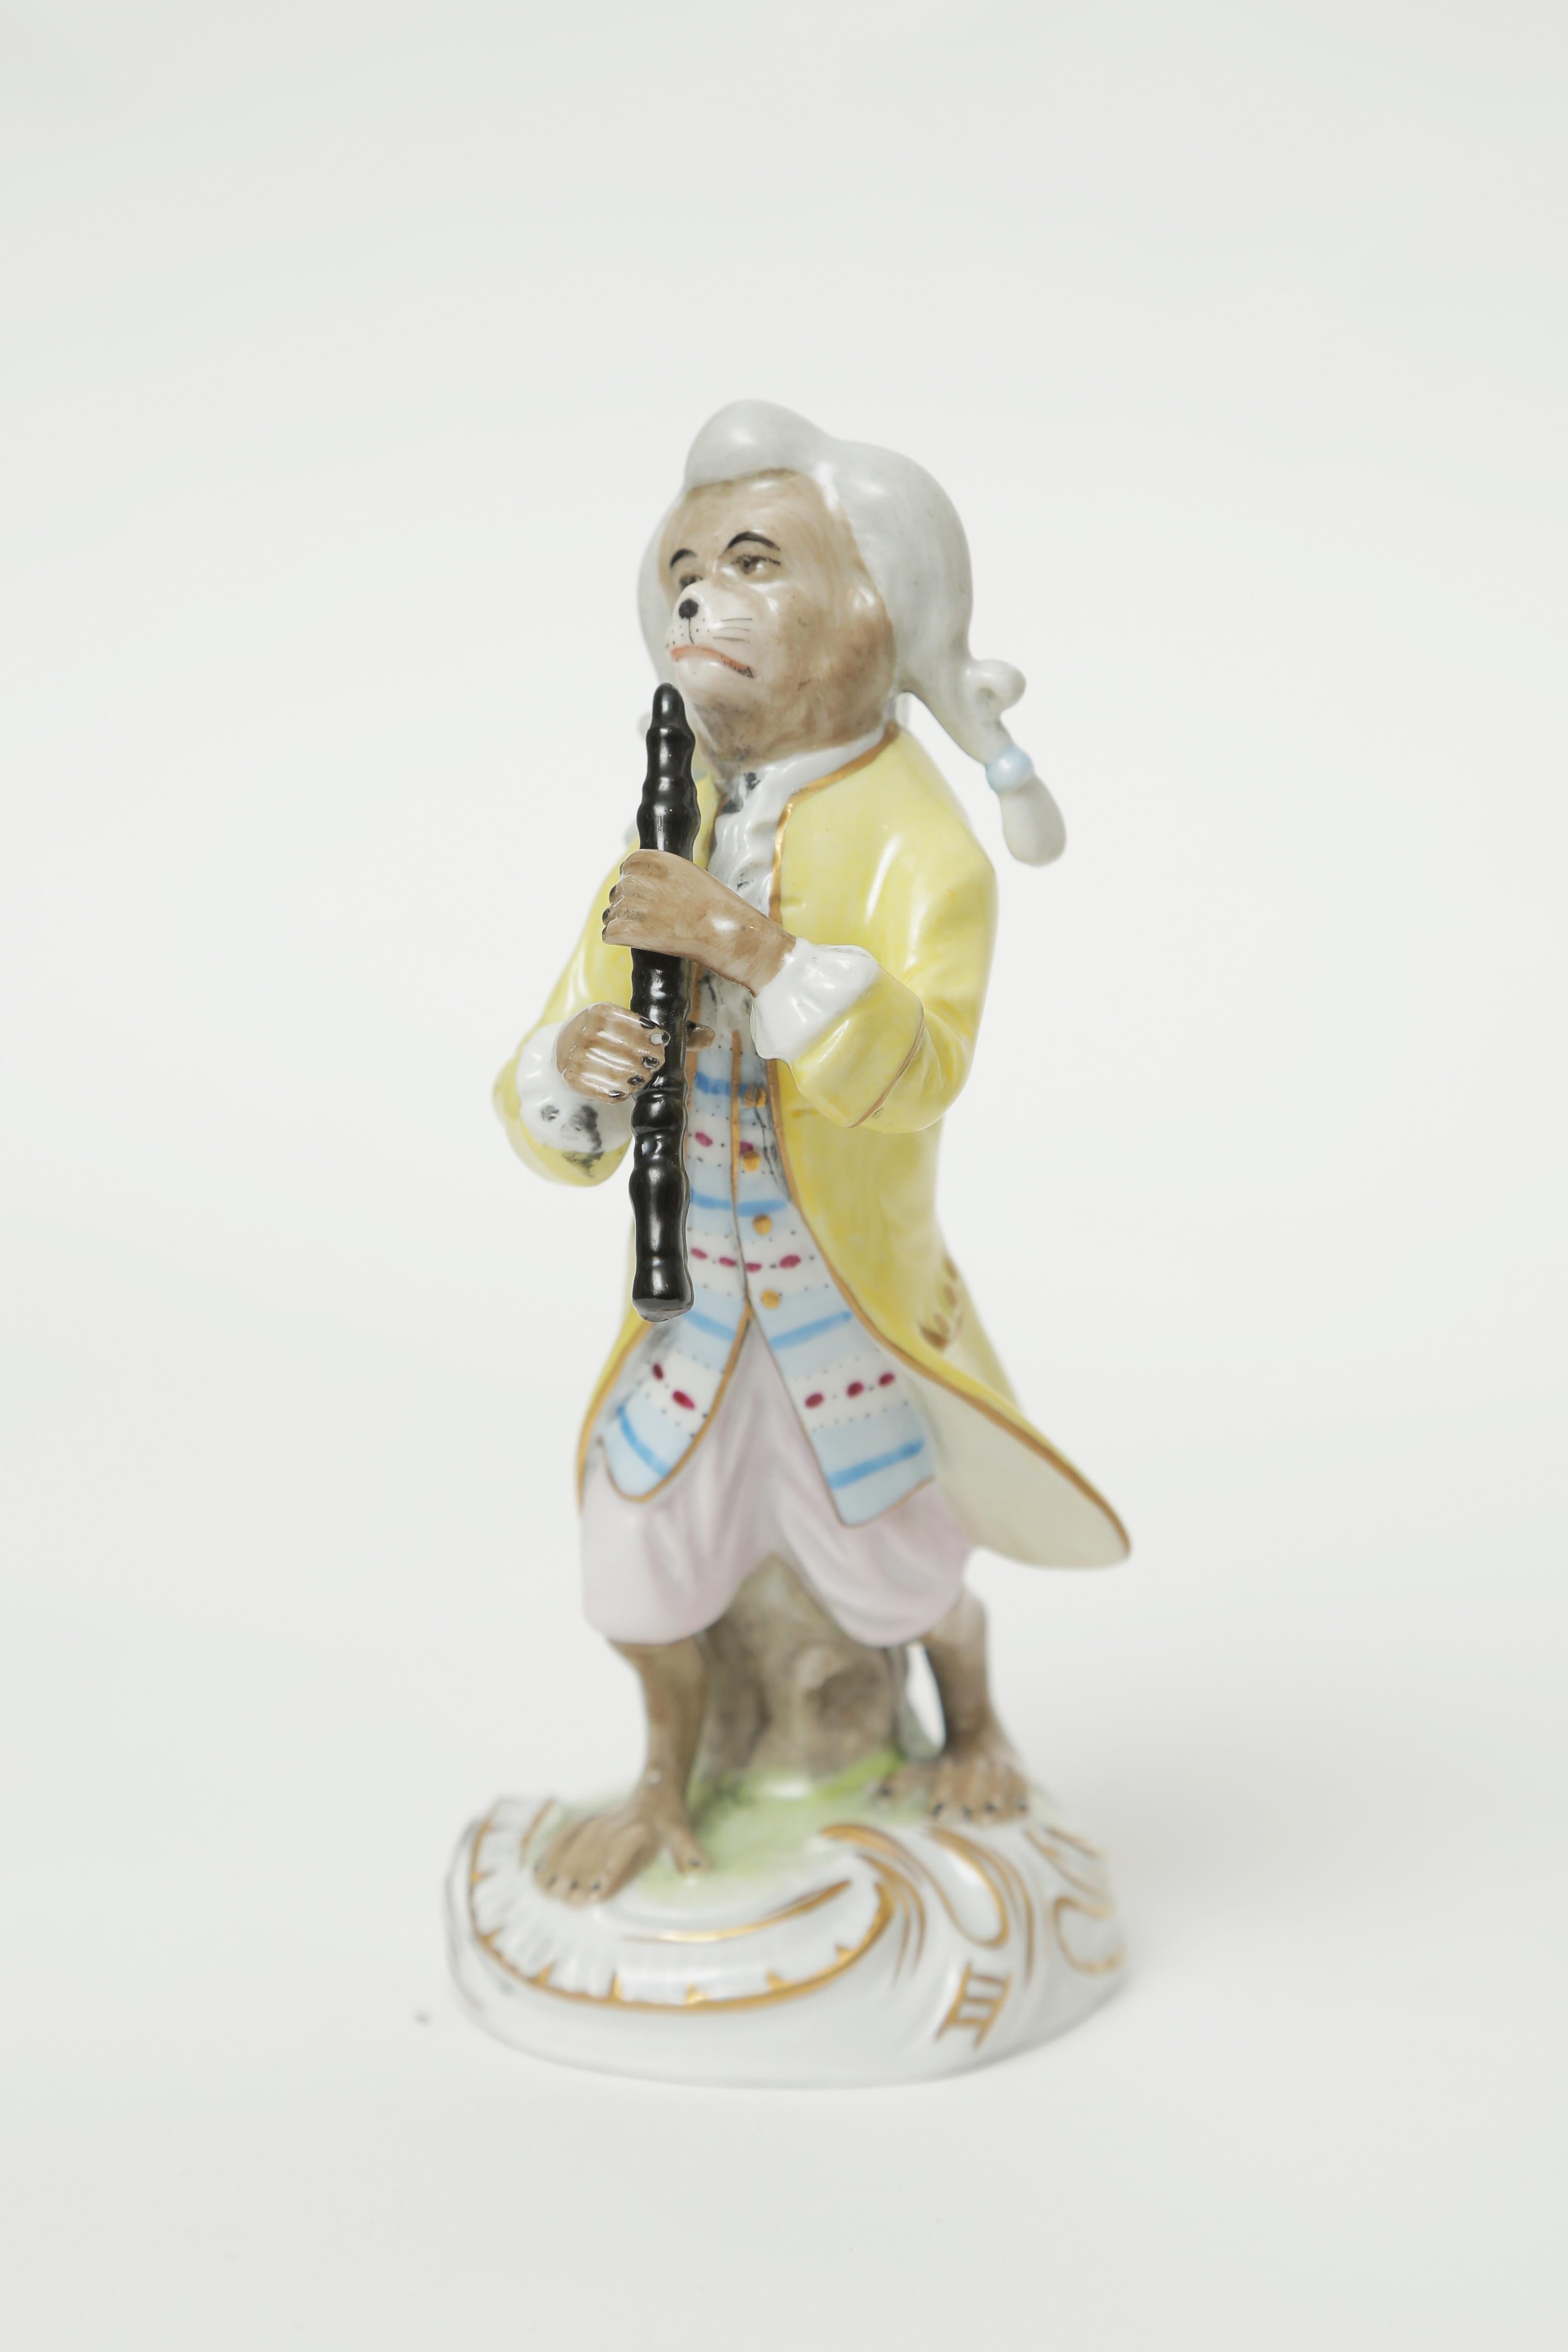 Antique Monkey Band Orchestra by Dresden, Finely Hand Painted and Whimsical 4